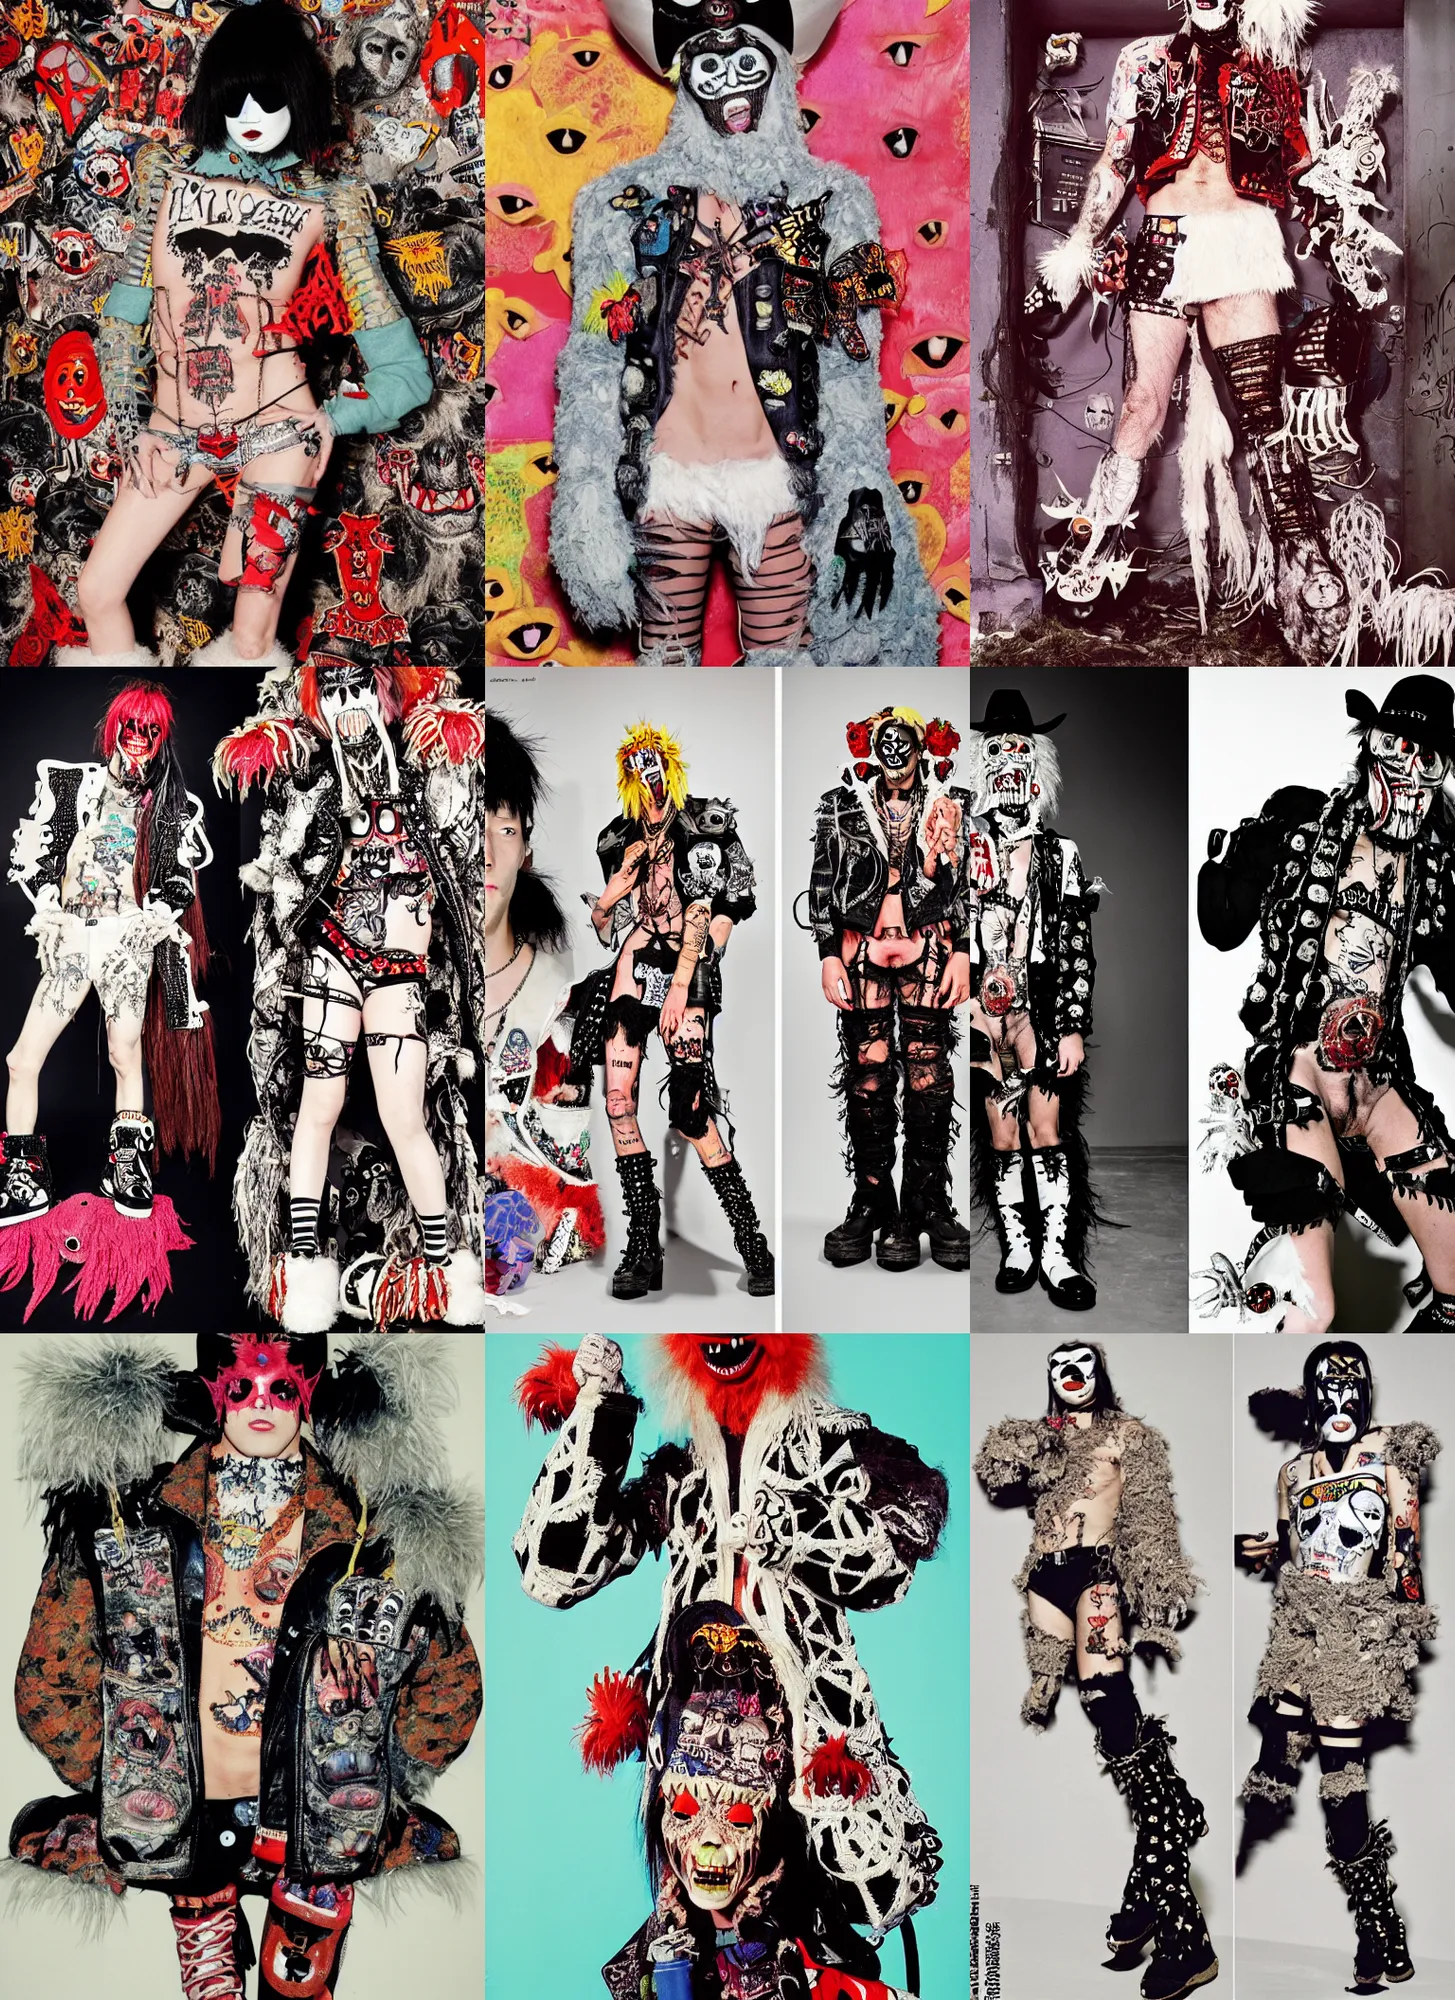 Prompt: photo of lace monster butterfly cowboy eye patch wearing ripped up dirty Swear kiss monster teeth yeti platform boots in the style of Walter Van Beirendonck W&LT by 1990's FRUiTS magazine by Shoichi Aoki in the style of 20471120 by Jean Paul Gaultier in the style of Ed Hardy by Von Dutch by Christopher Nemeth in the style of Harajuku stret style japan and in the style Rammellzee by Insane Clown Posse in the style of Ai Yazawa's Nana by CyberDog and emo scene style by Ryan Trecartin in the style of Dorian Electra by Rick Owens by Jun Takahashi in a dirty dark dark dark poorly lit bedroom full of trash and garbage server racks and cables everywhere in the style of Juergen Teller in the style of Shoichi Aoki, japanese street fashion, KEROUAC magazine,, Milk Bar Magazine, Vivienne Westwood, y2K aesthetic